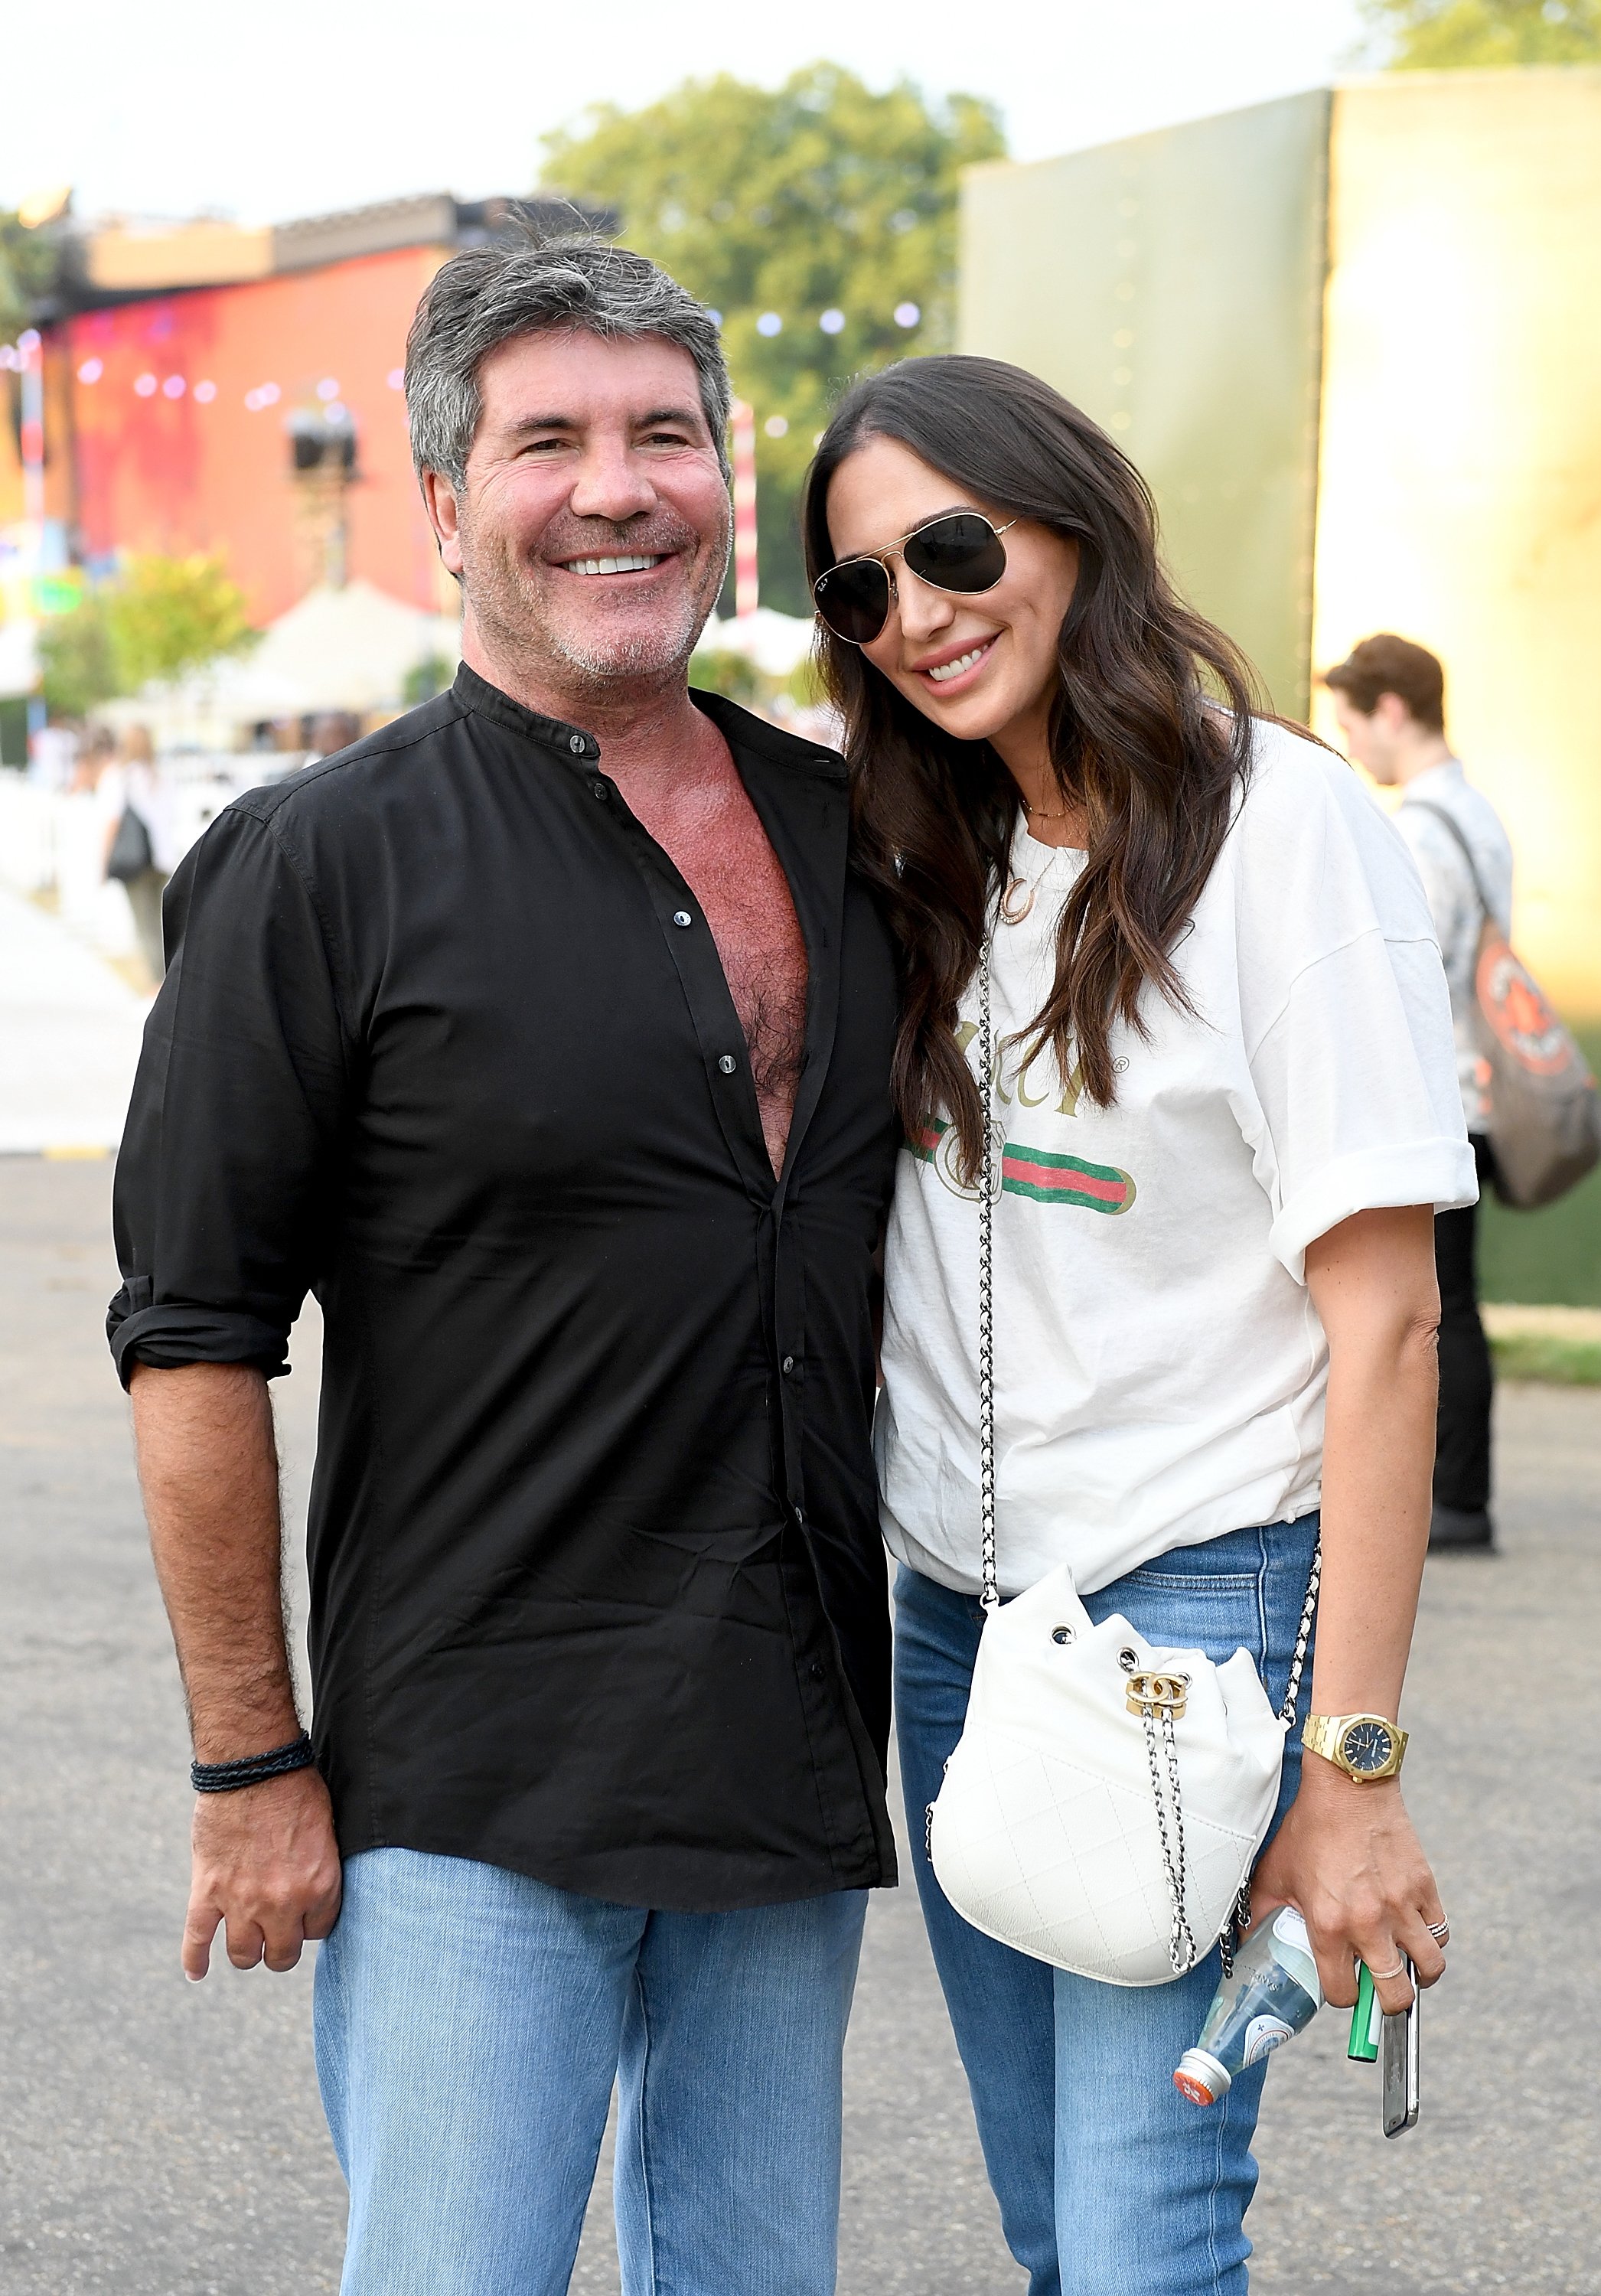 Simon Cowell and Lauren Silverman attend as Barclaycard present British Summer Time Hyde Park on July 6, 2018, in London, England. | Source: Getty Images.